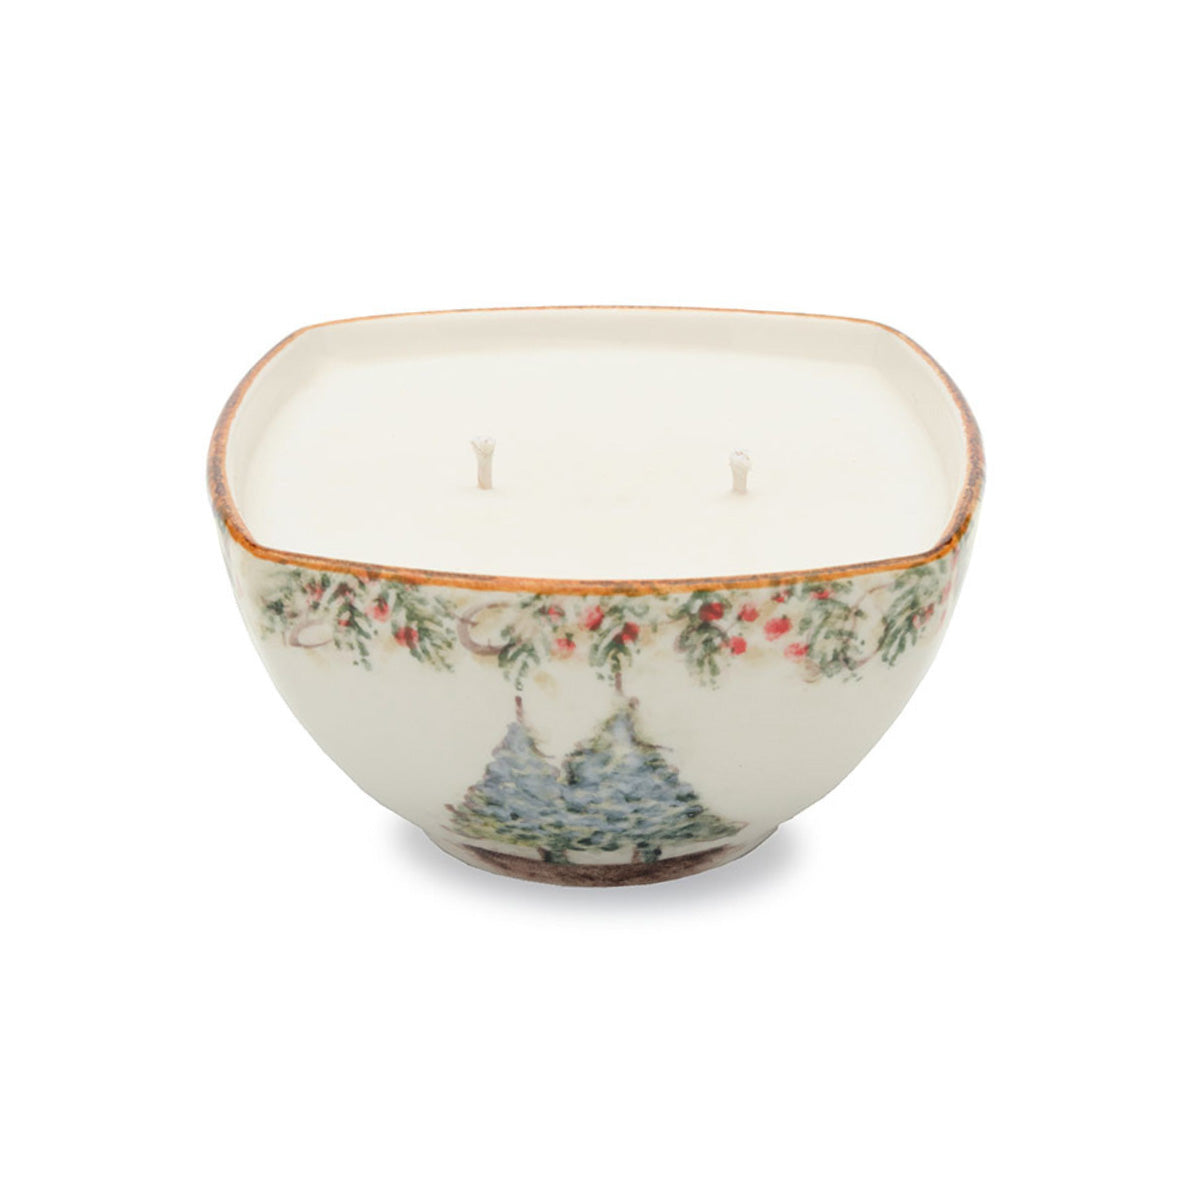 Natale Candle in Small Square Bowl